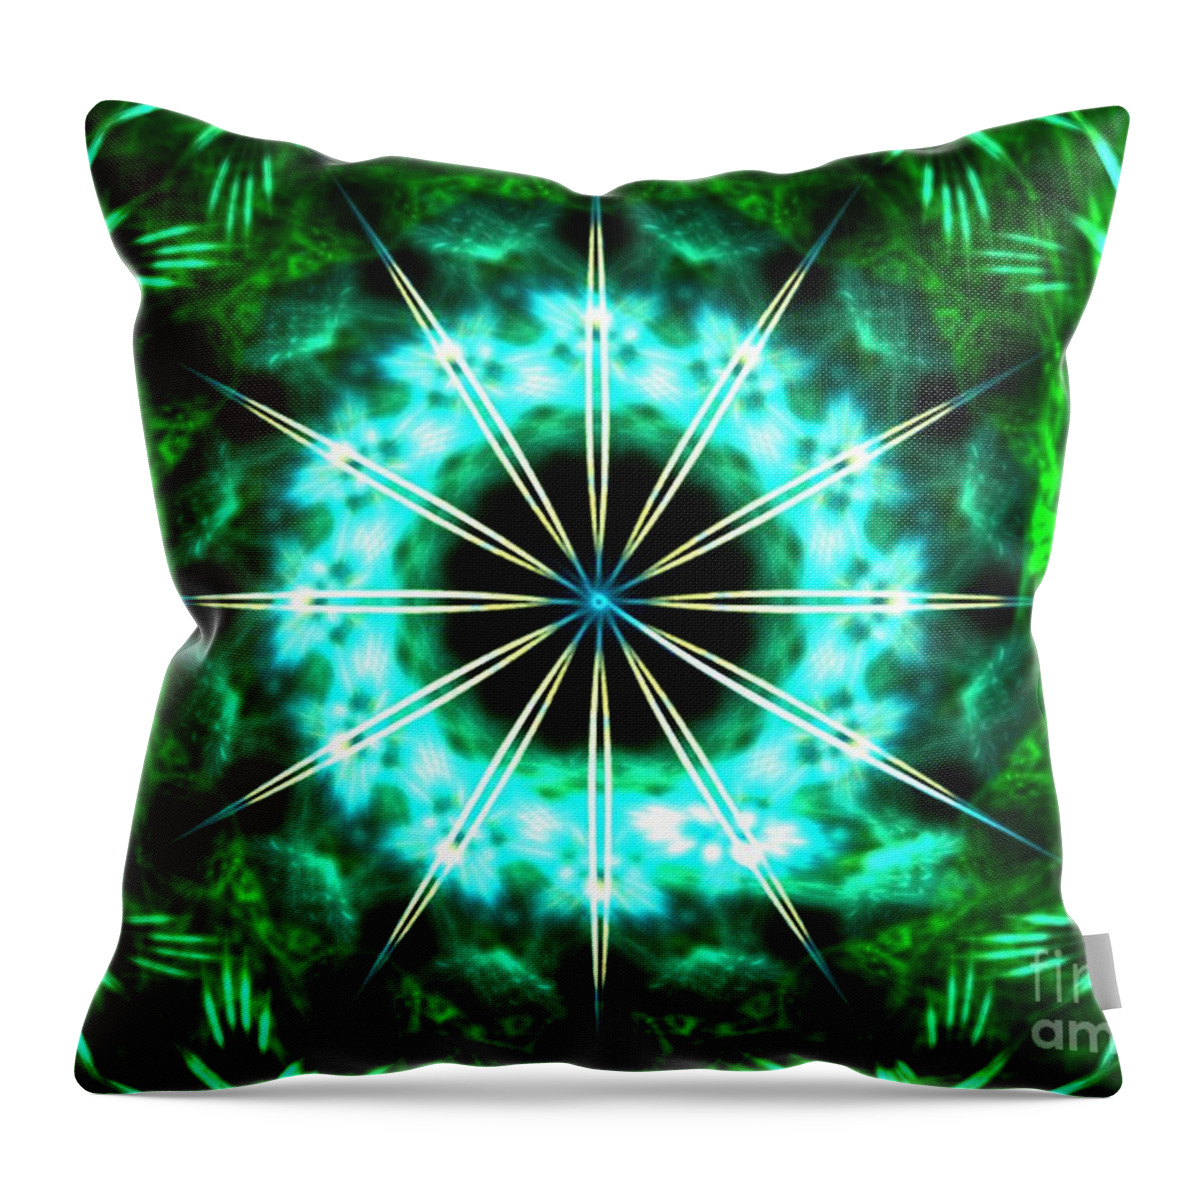 Apophysis Throw Pillow featuring the digital art Green Compass by Kim Sy Ok